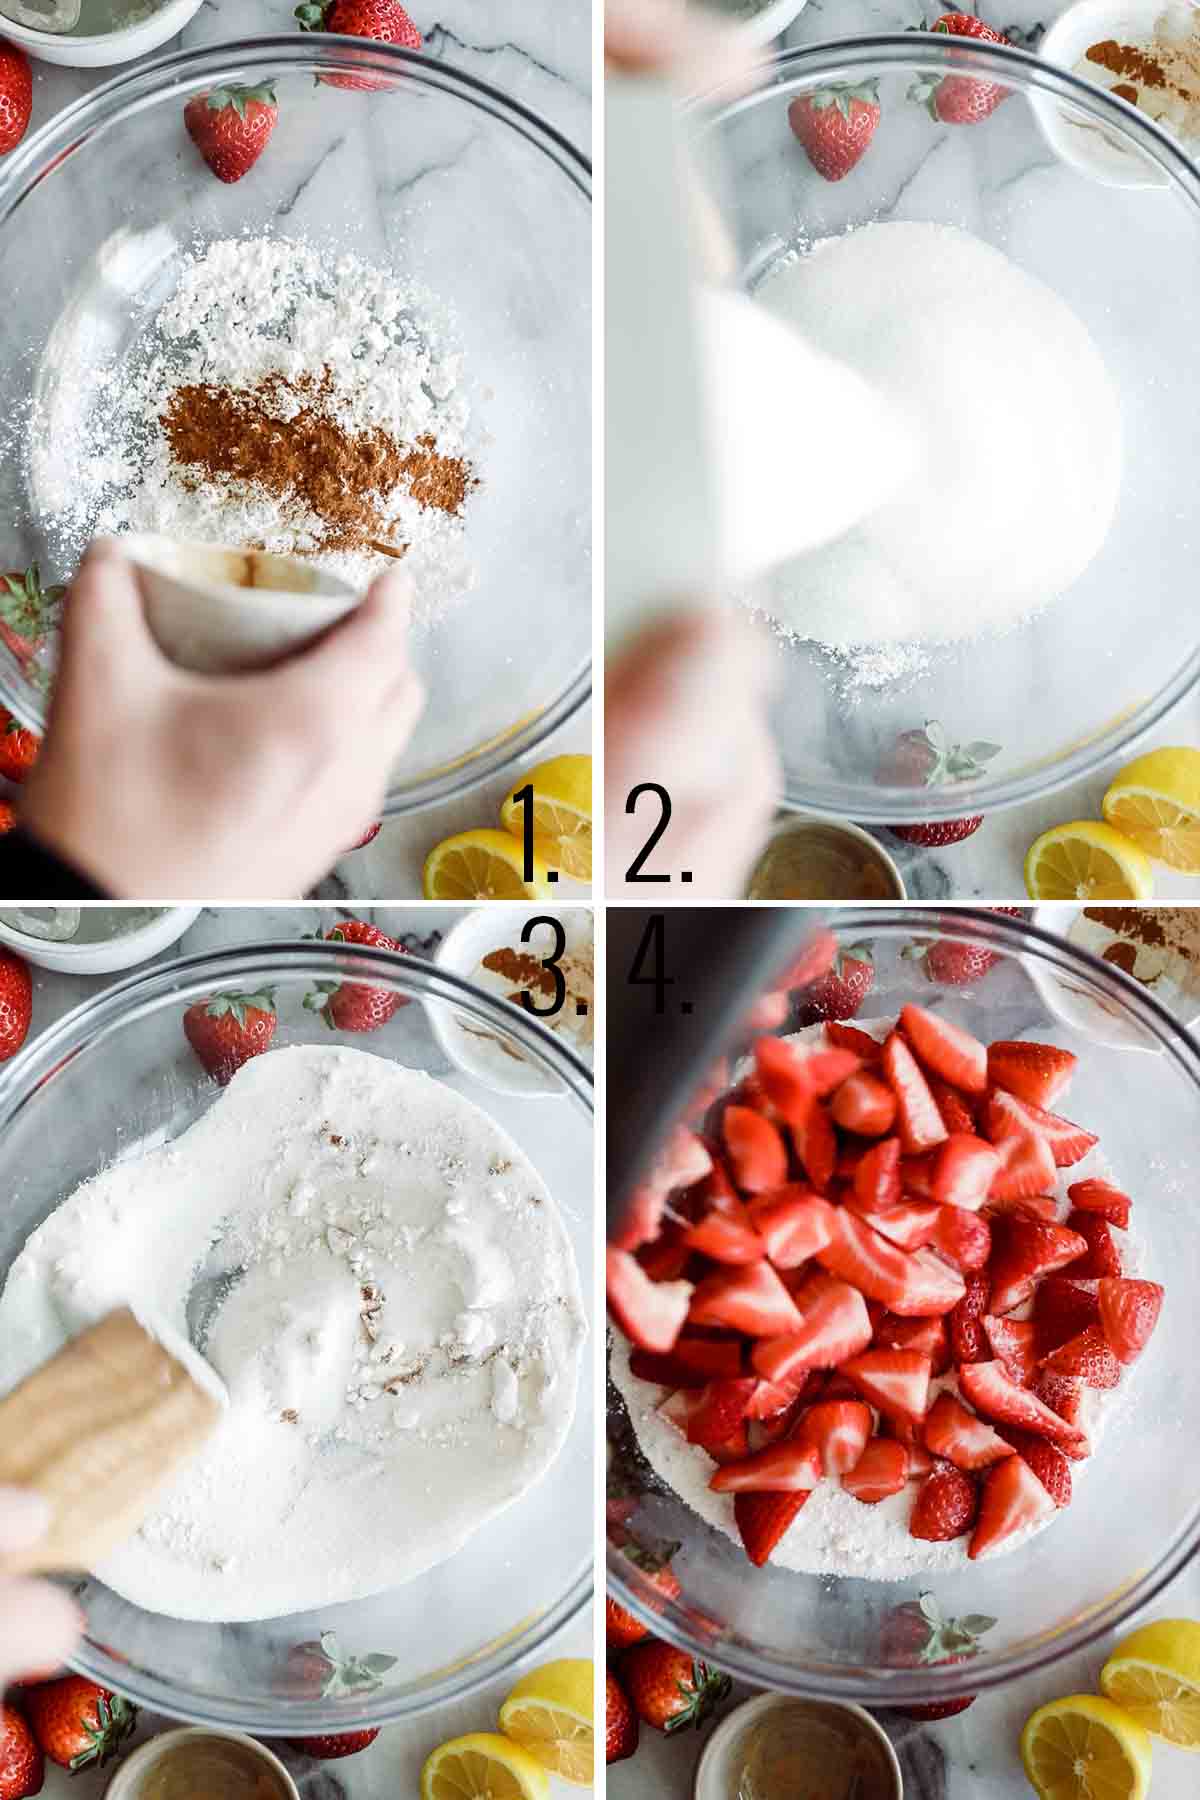 Dry ingredients and strawberries added to a glass bowl. 